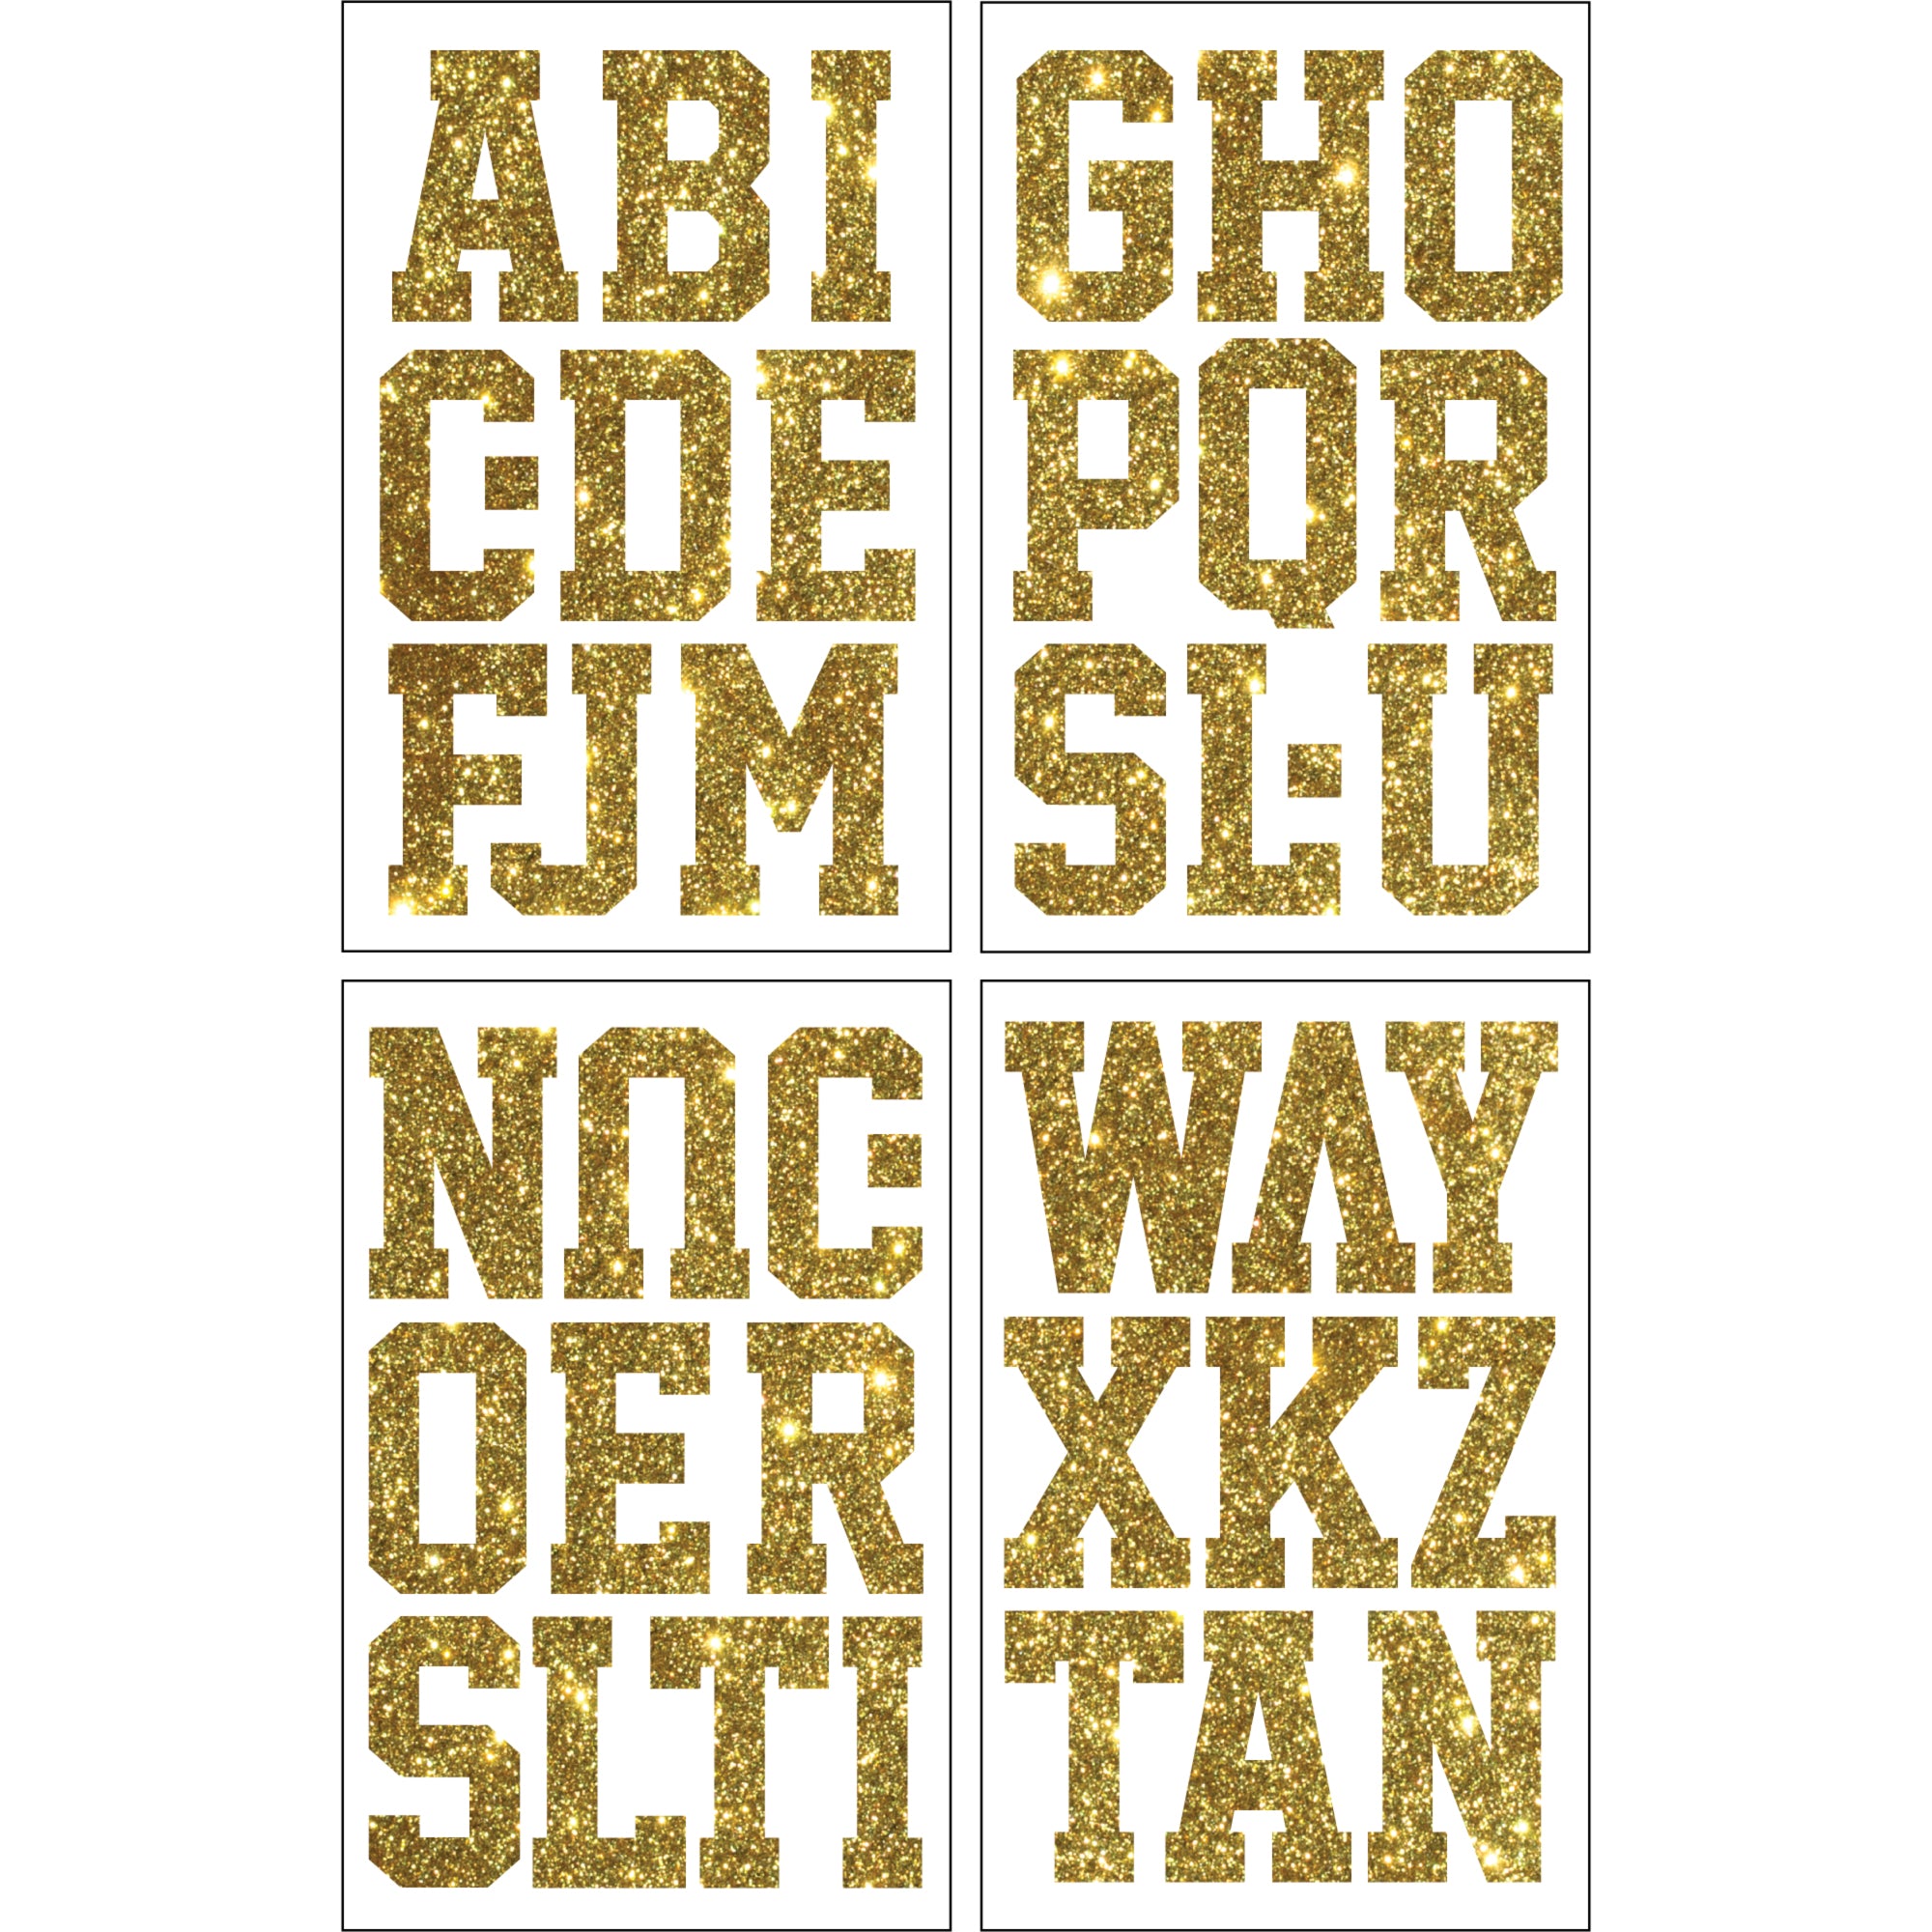 Rico Iron-On Glit Letters A-Z Gold